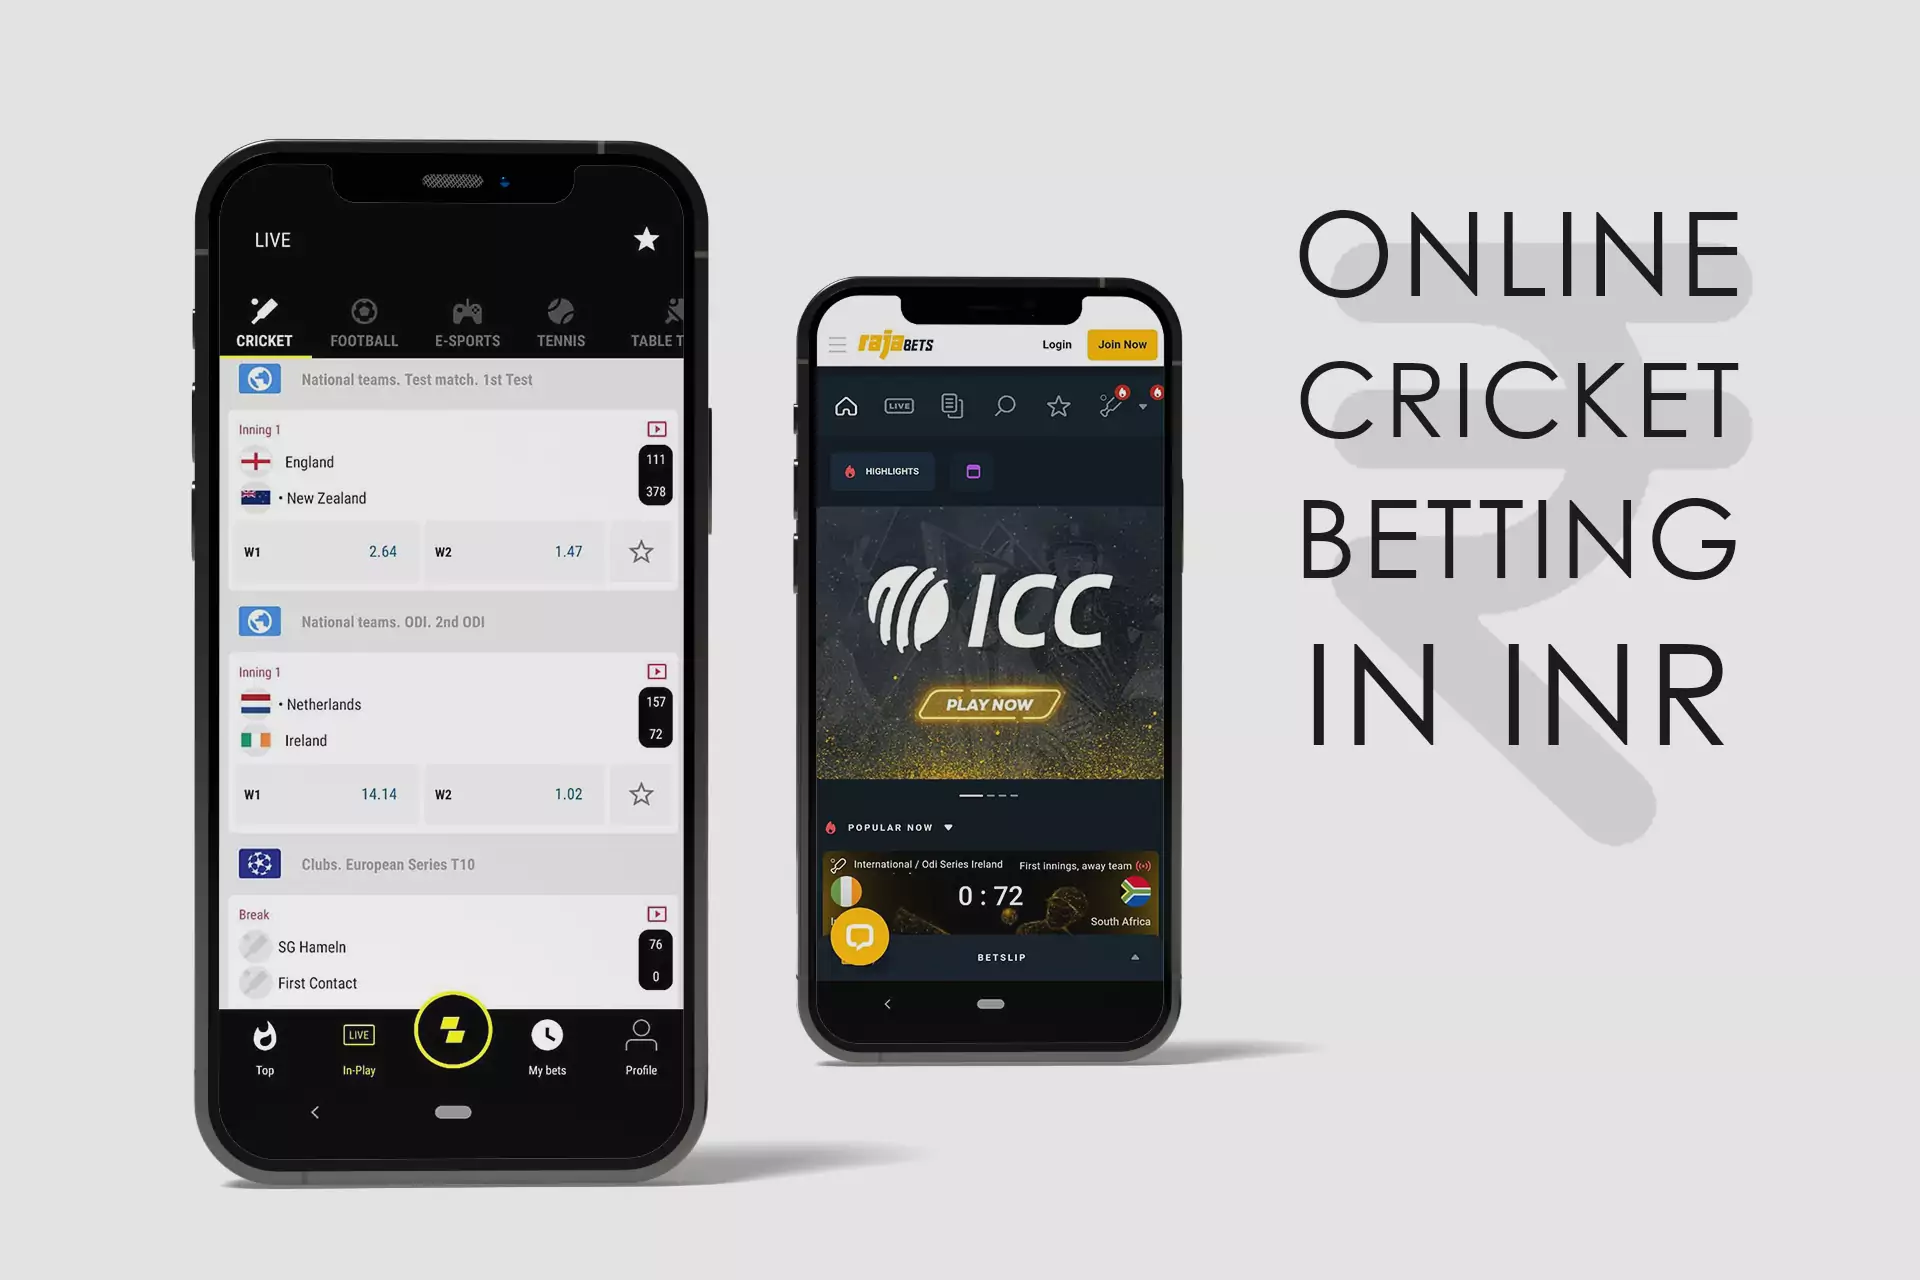 Many bookmakers provide the possibility of online betting on cricket in Indian rupees.